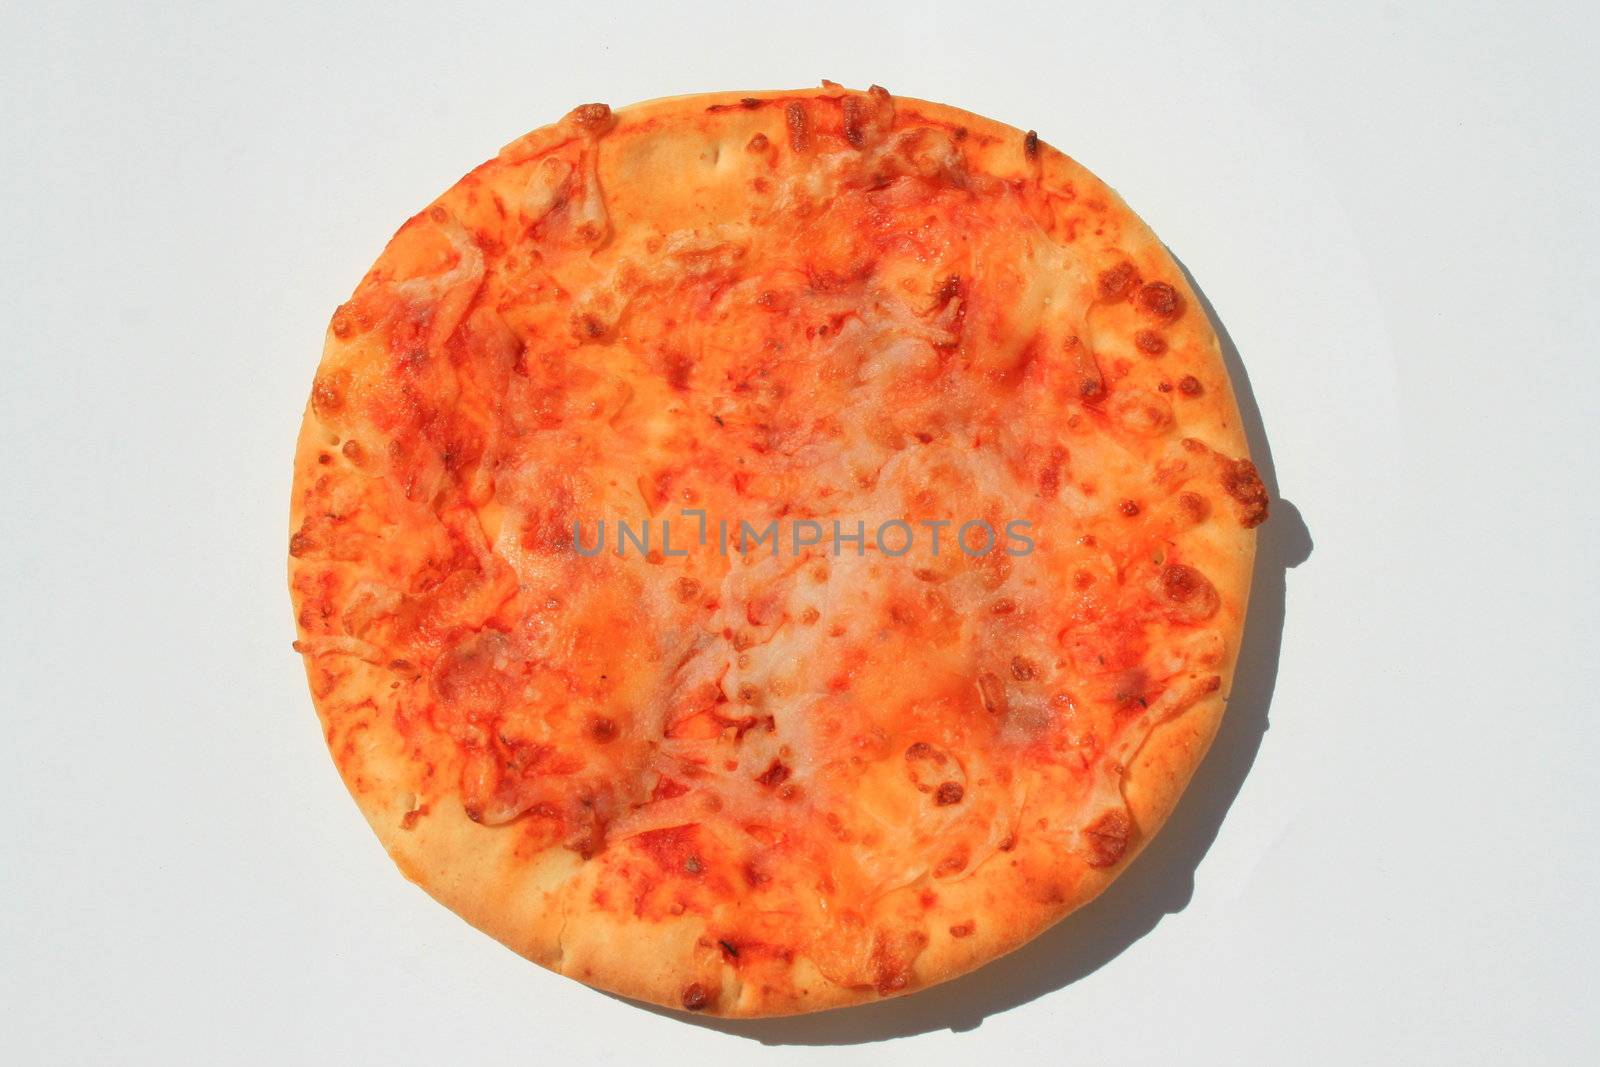 Close up of a mini cheese pizza.
